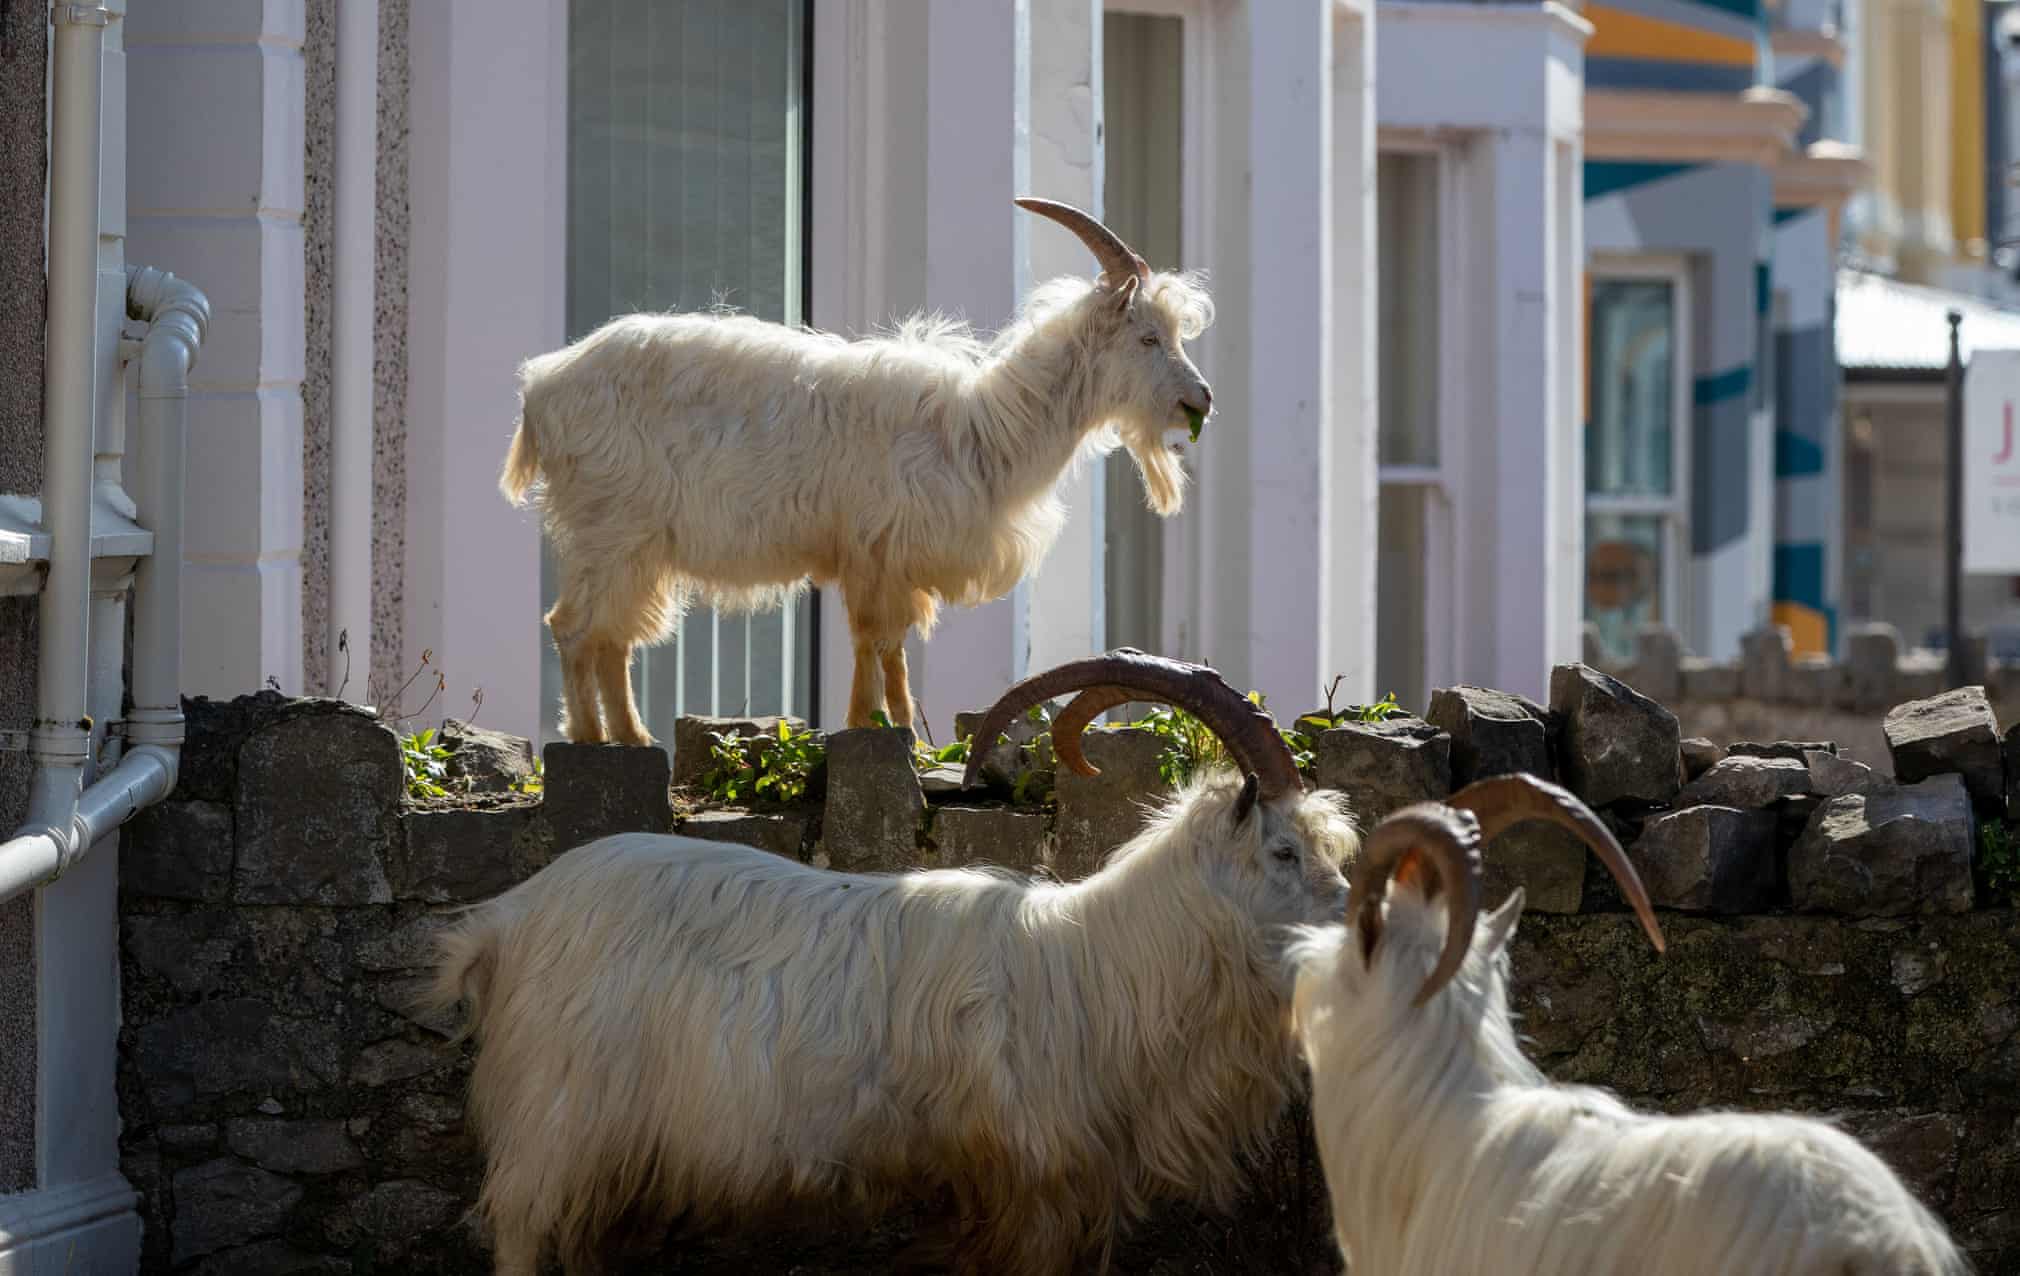 Cute, Fuzzy Mountain Goats Take Over Deserted Town After Covid-19 Forces Everyone To Stay Home - WORLD OF BUZZ 2